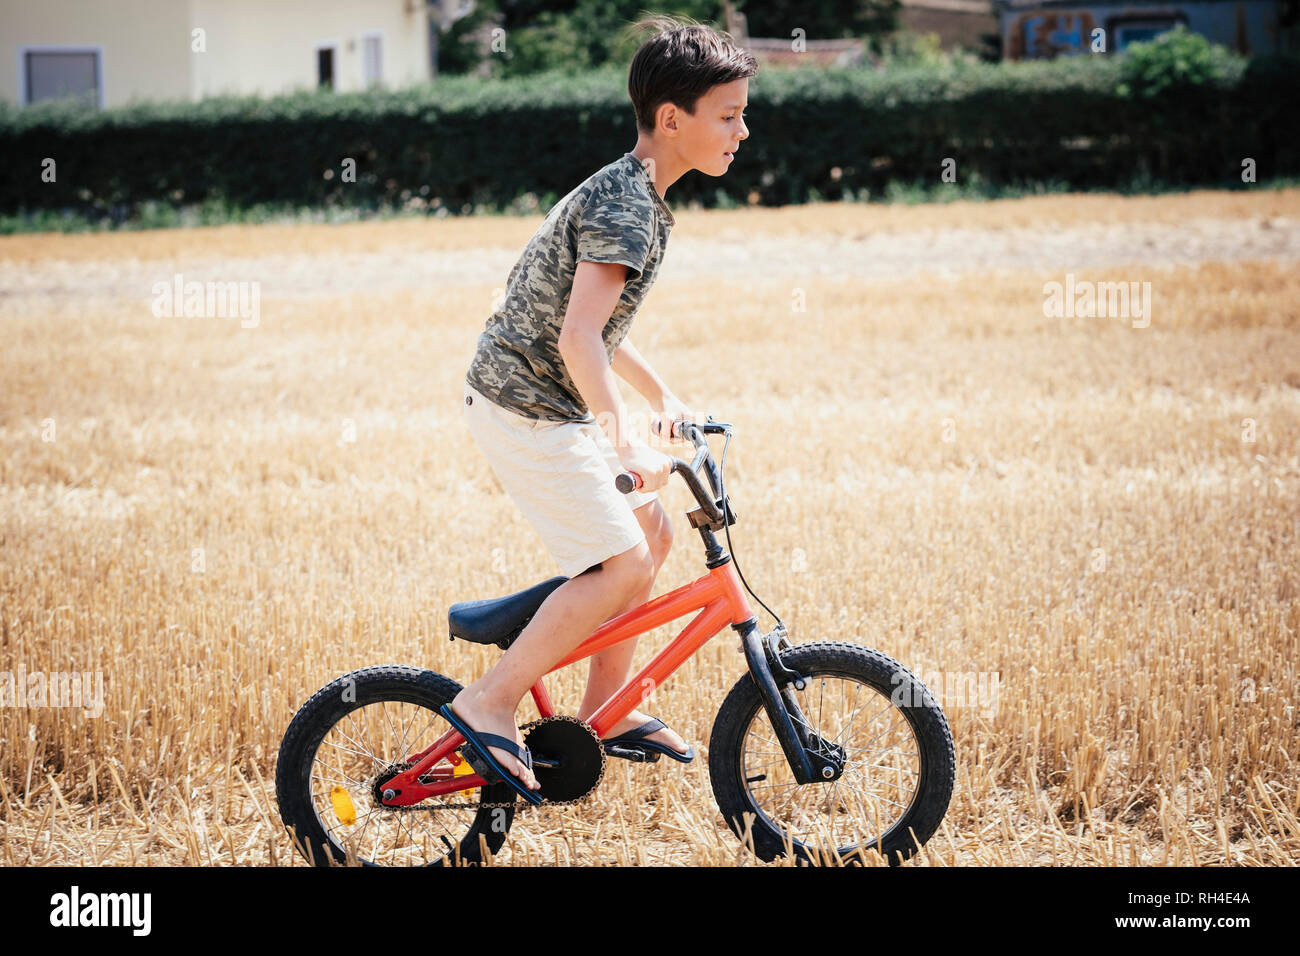 Boy riding bicycle in sunny rural field Stock Photo